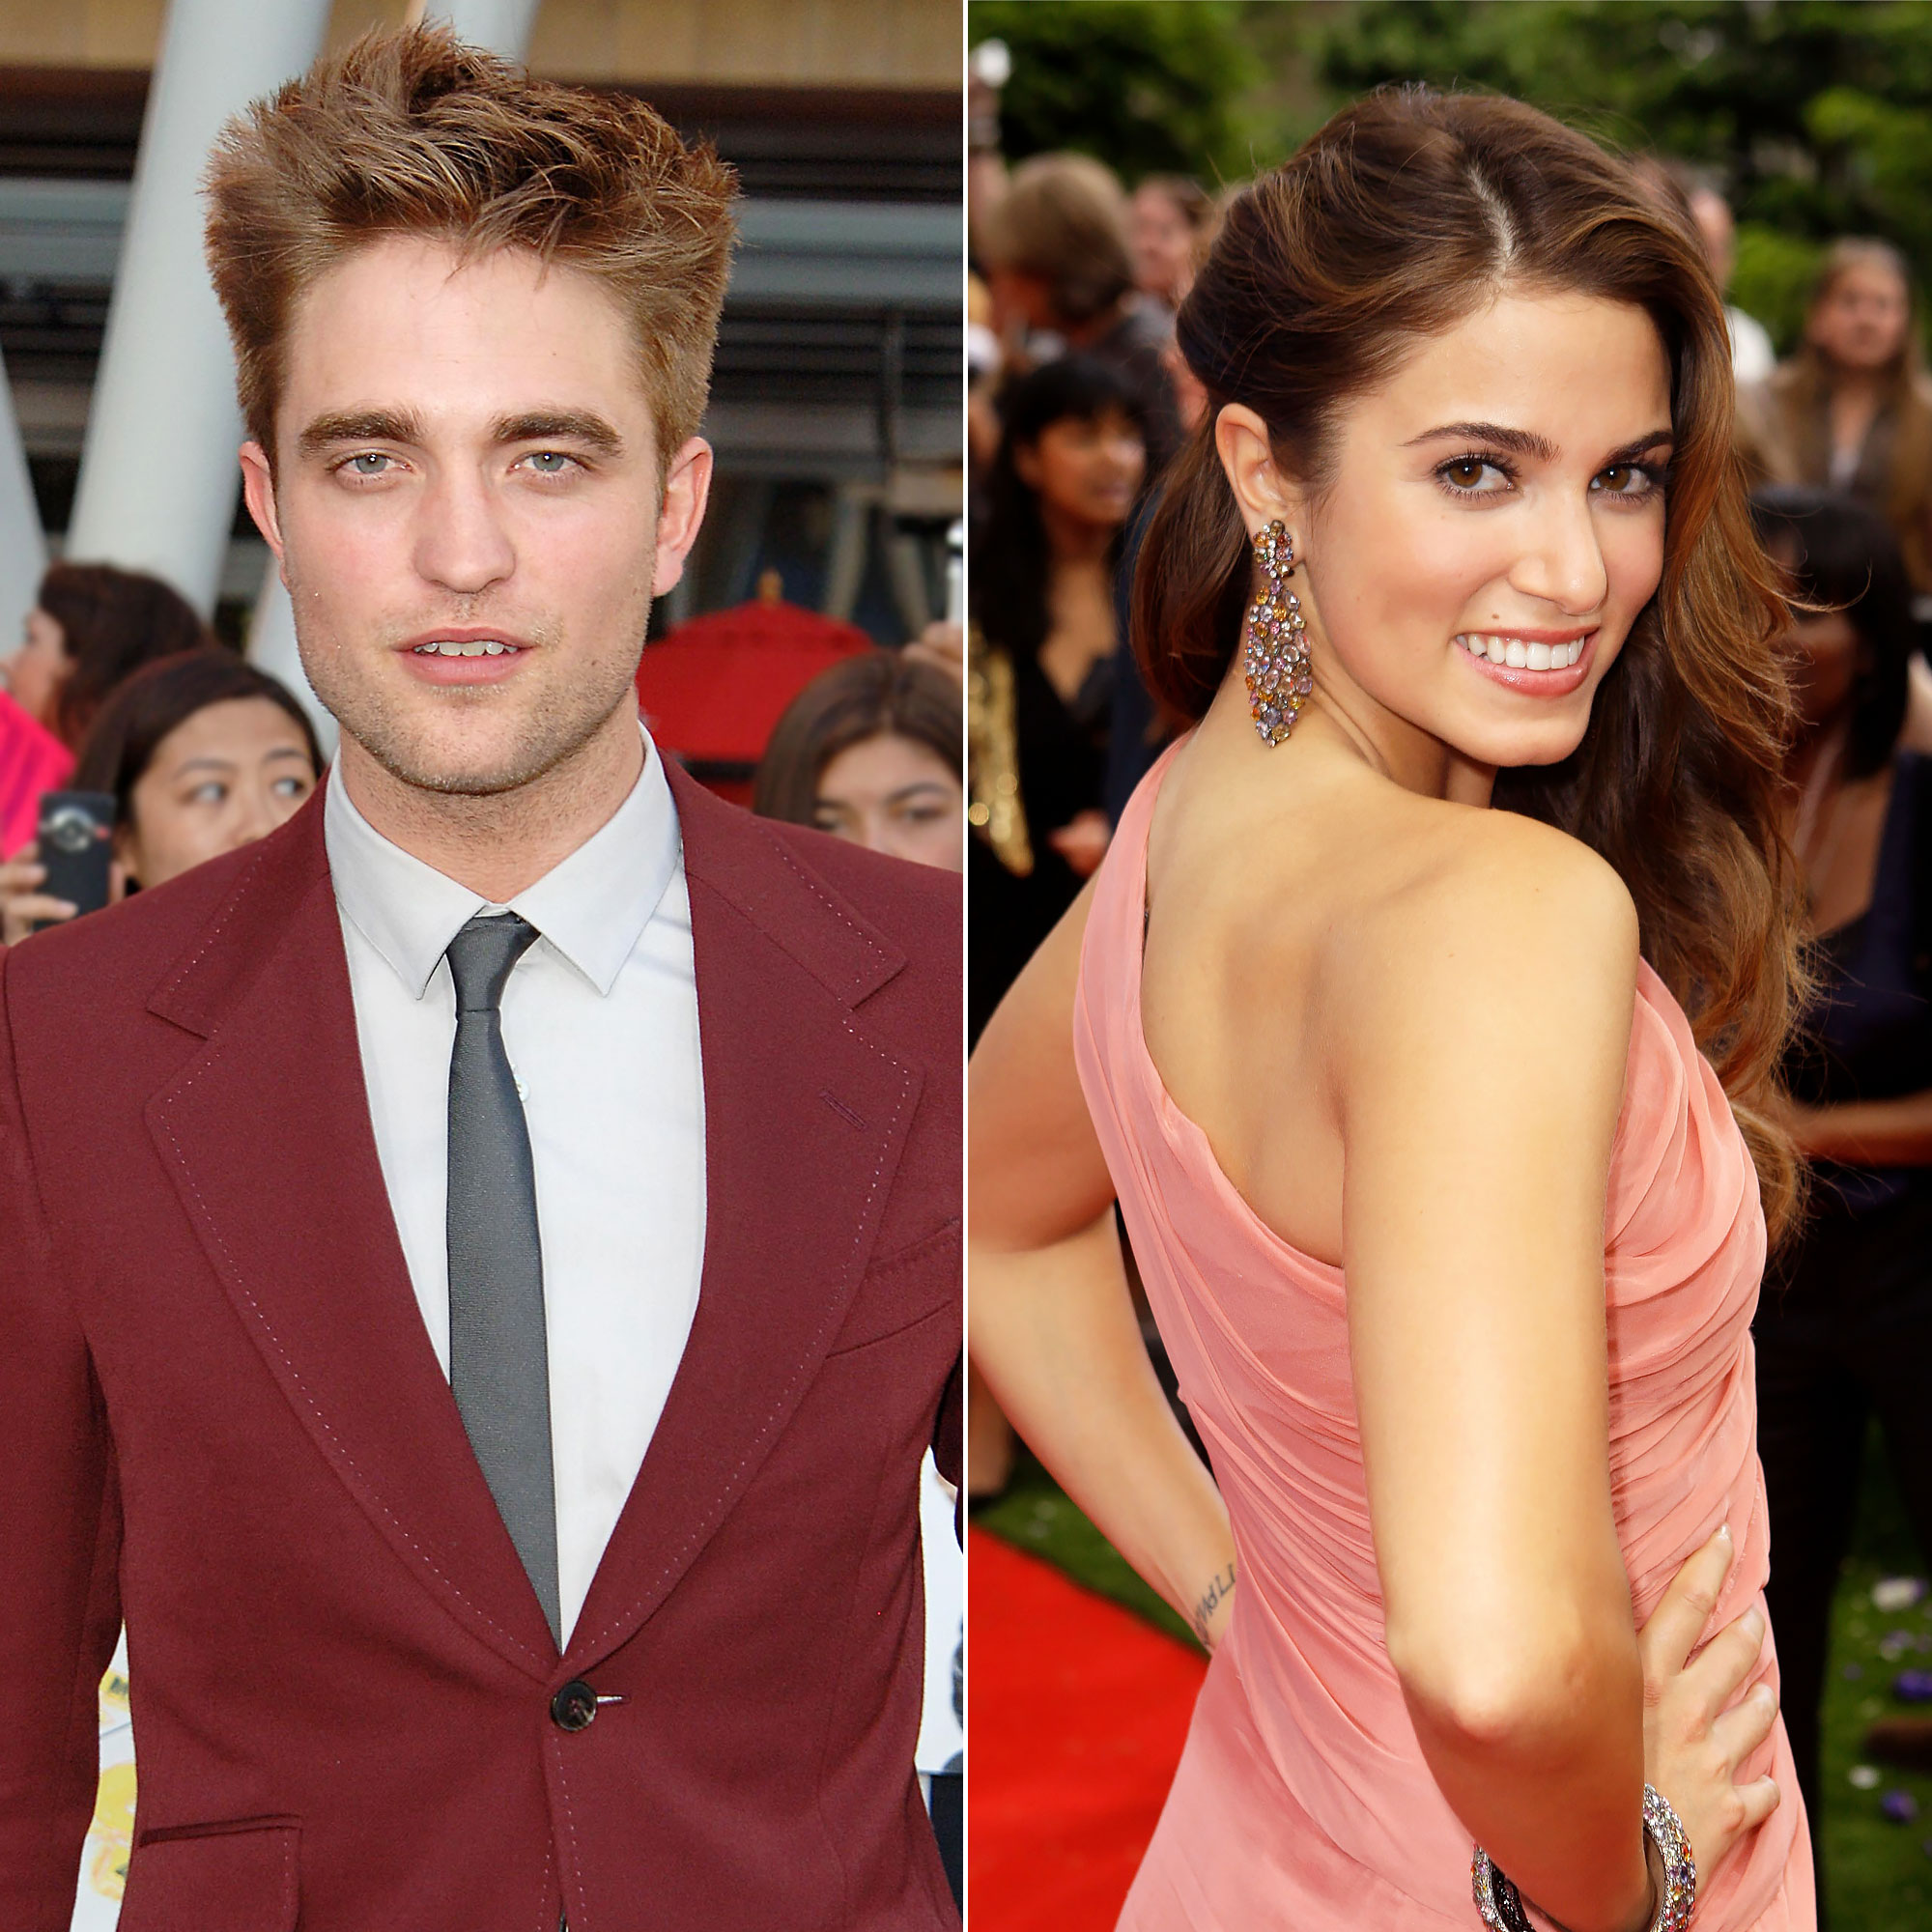 Dating now pattinson robert Who Is